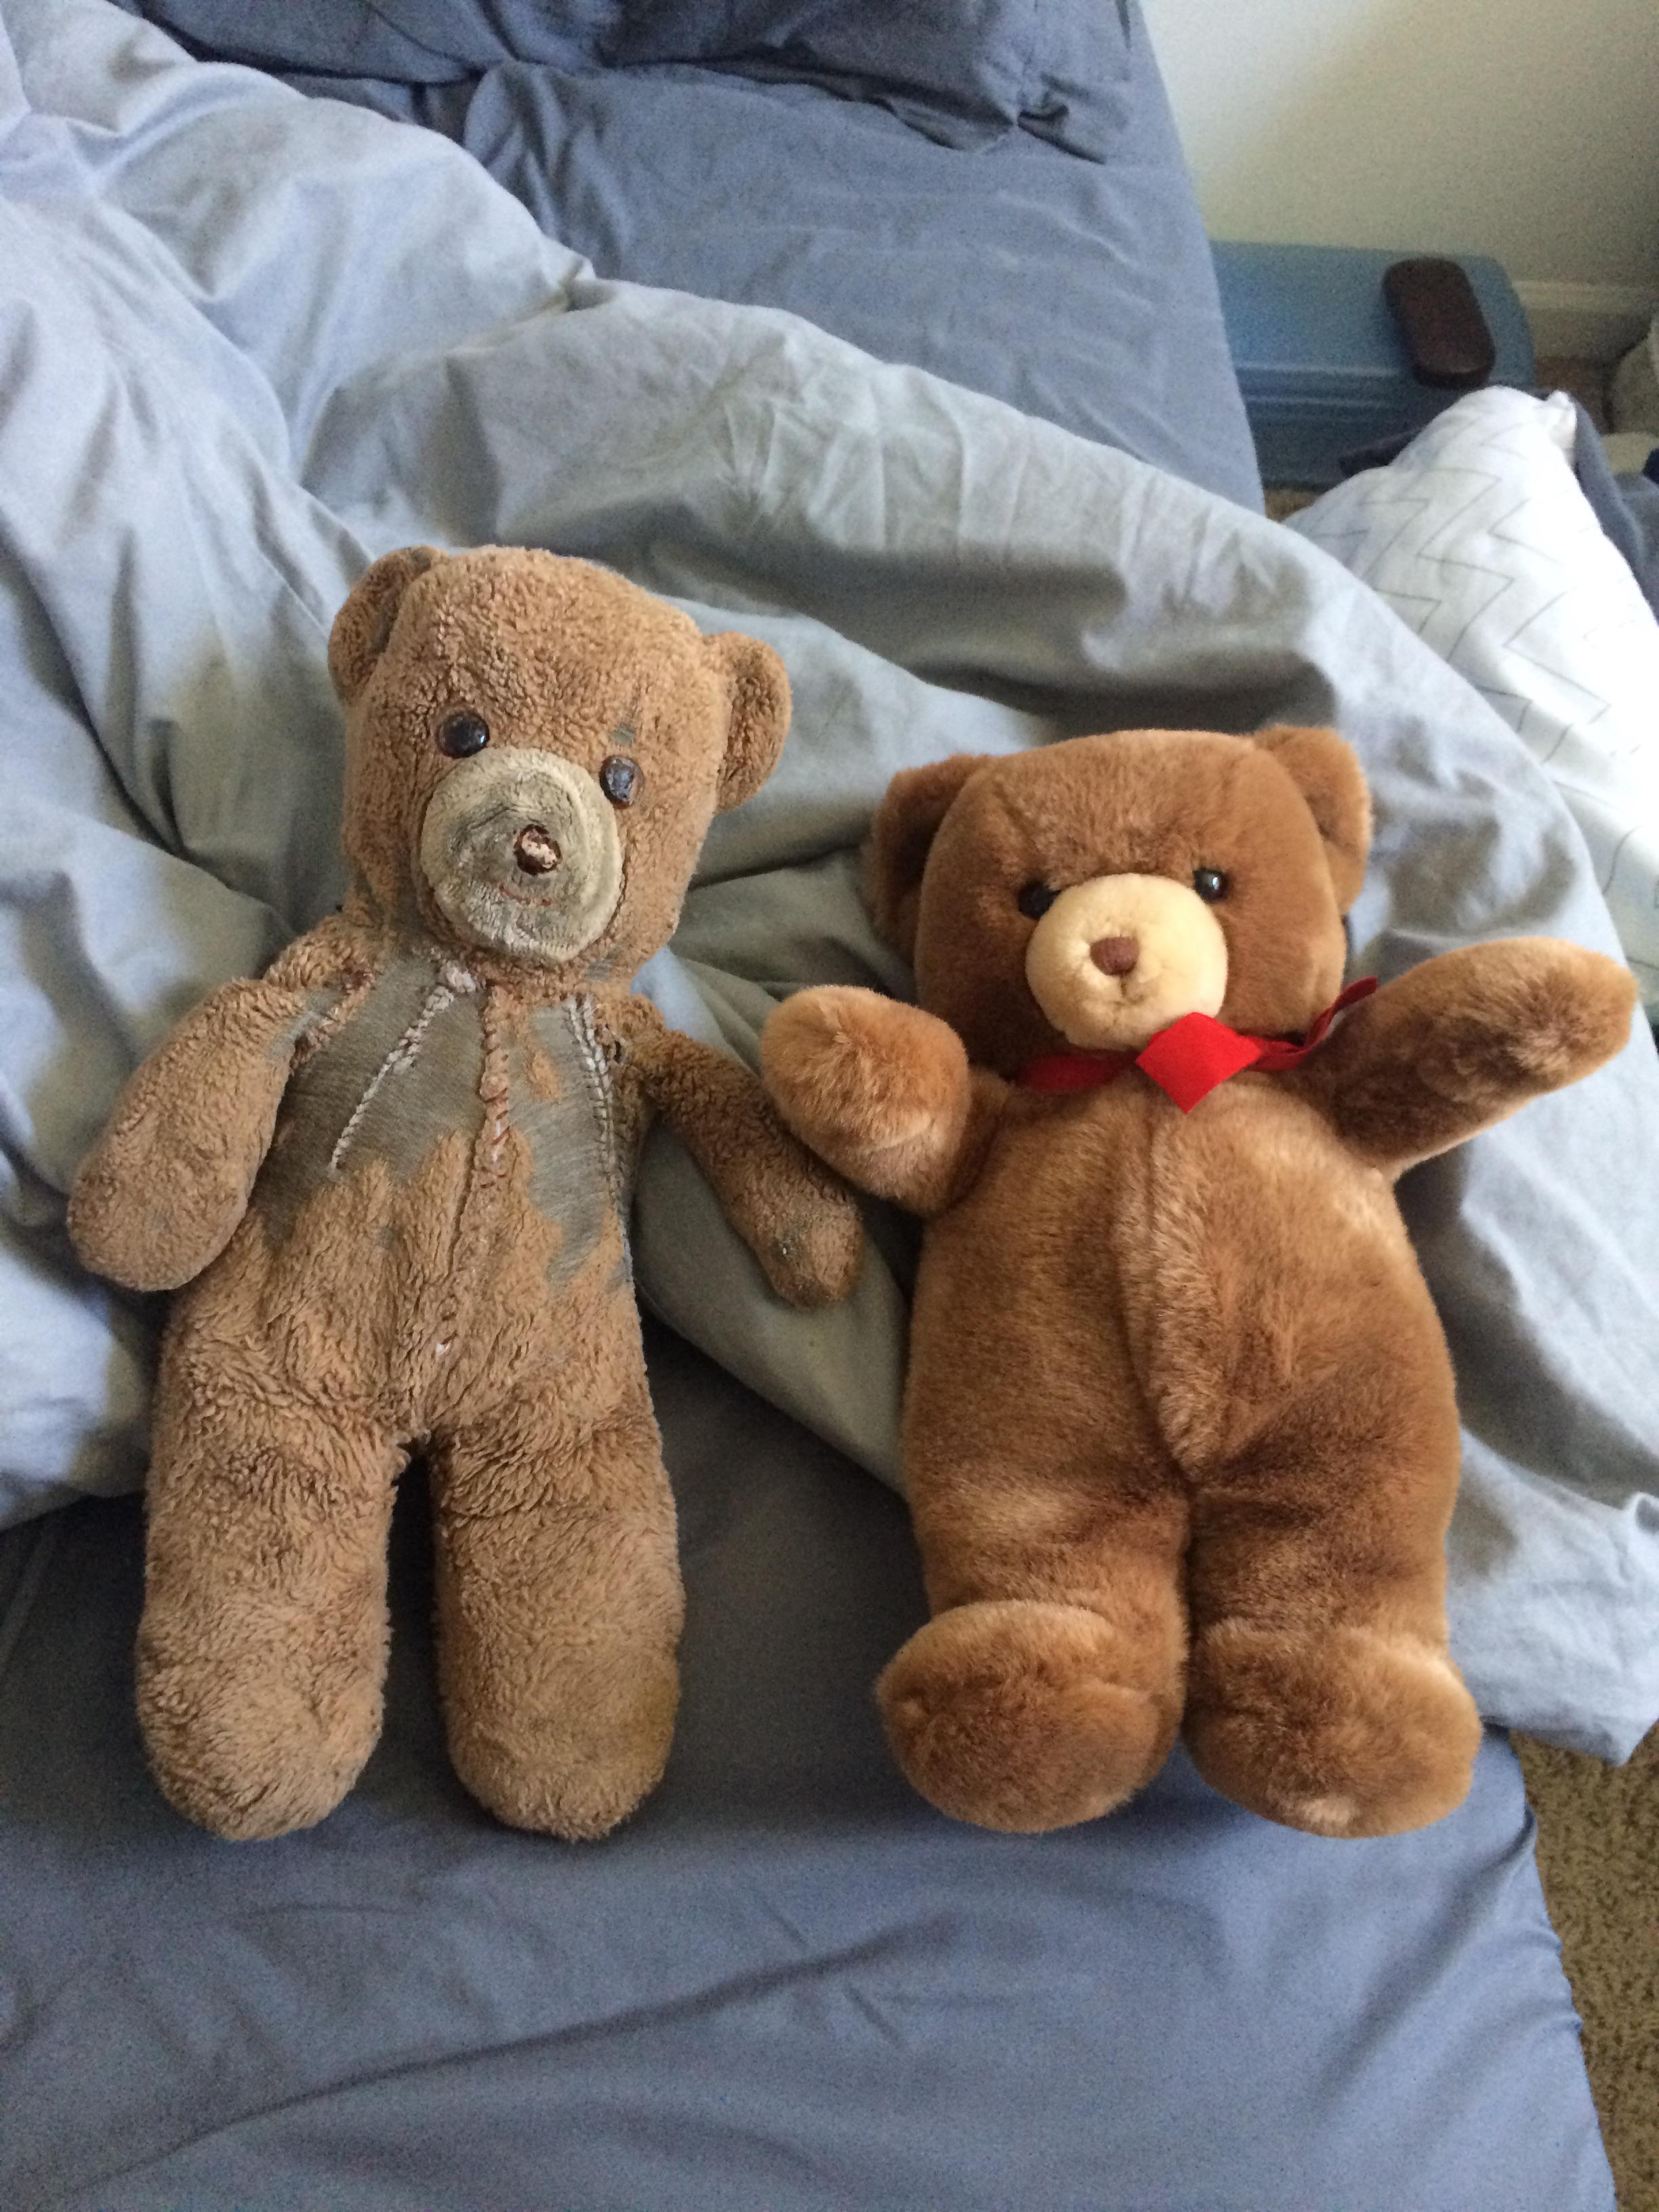 Same bear, one stored for 30 years, the other loved for 30 years